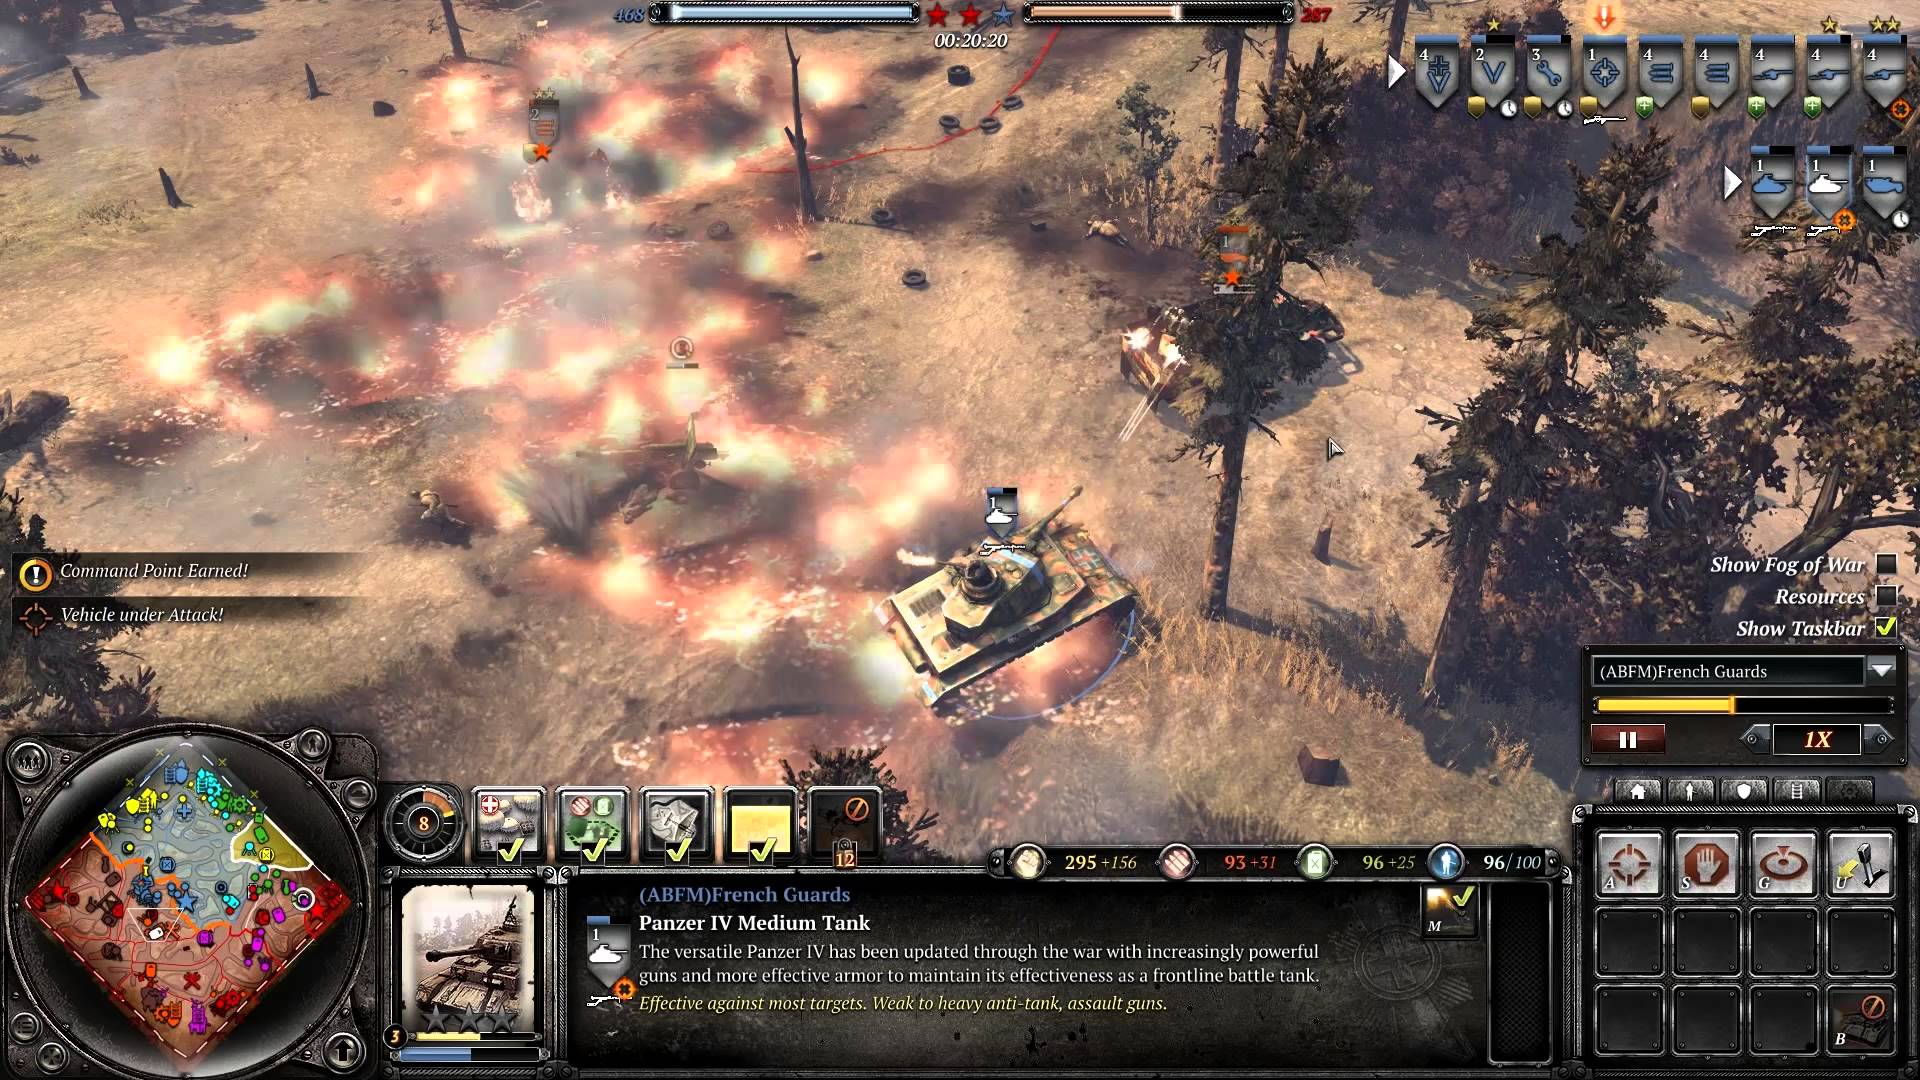 download game company of heroes 2 free